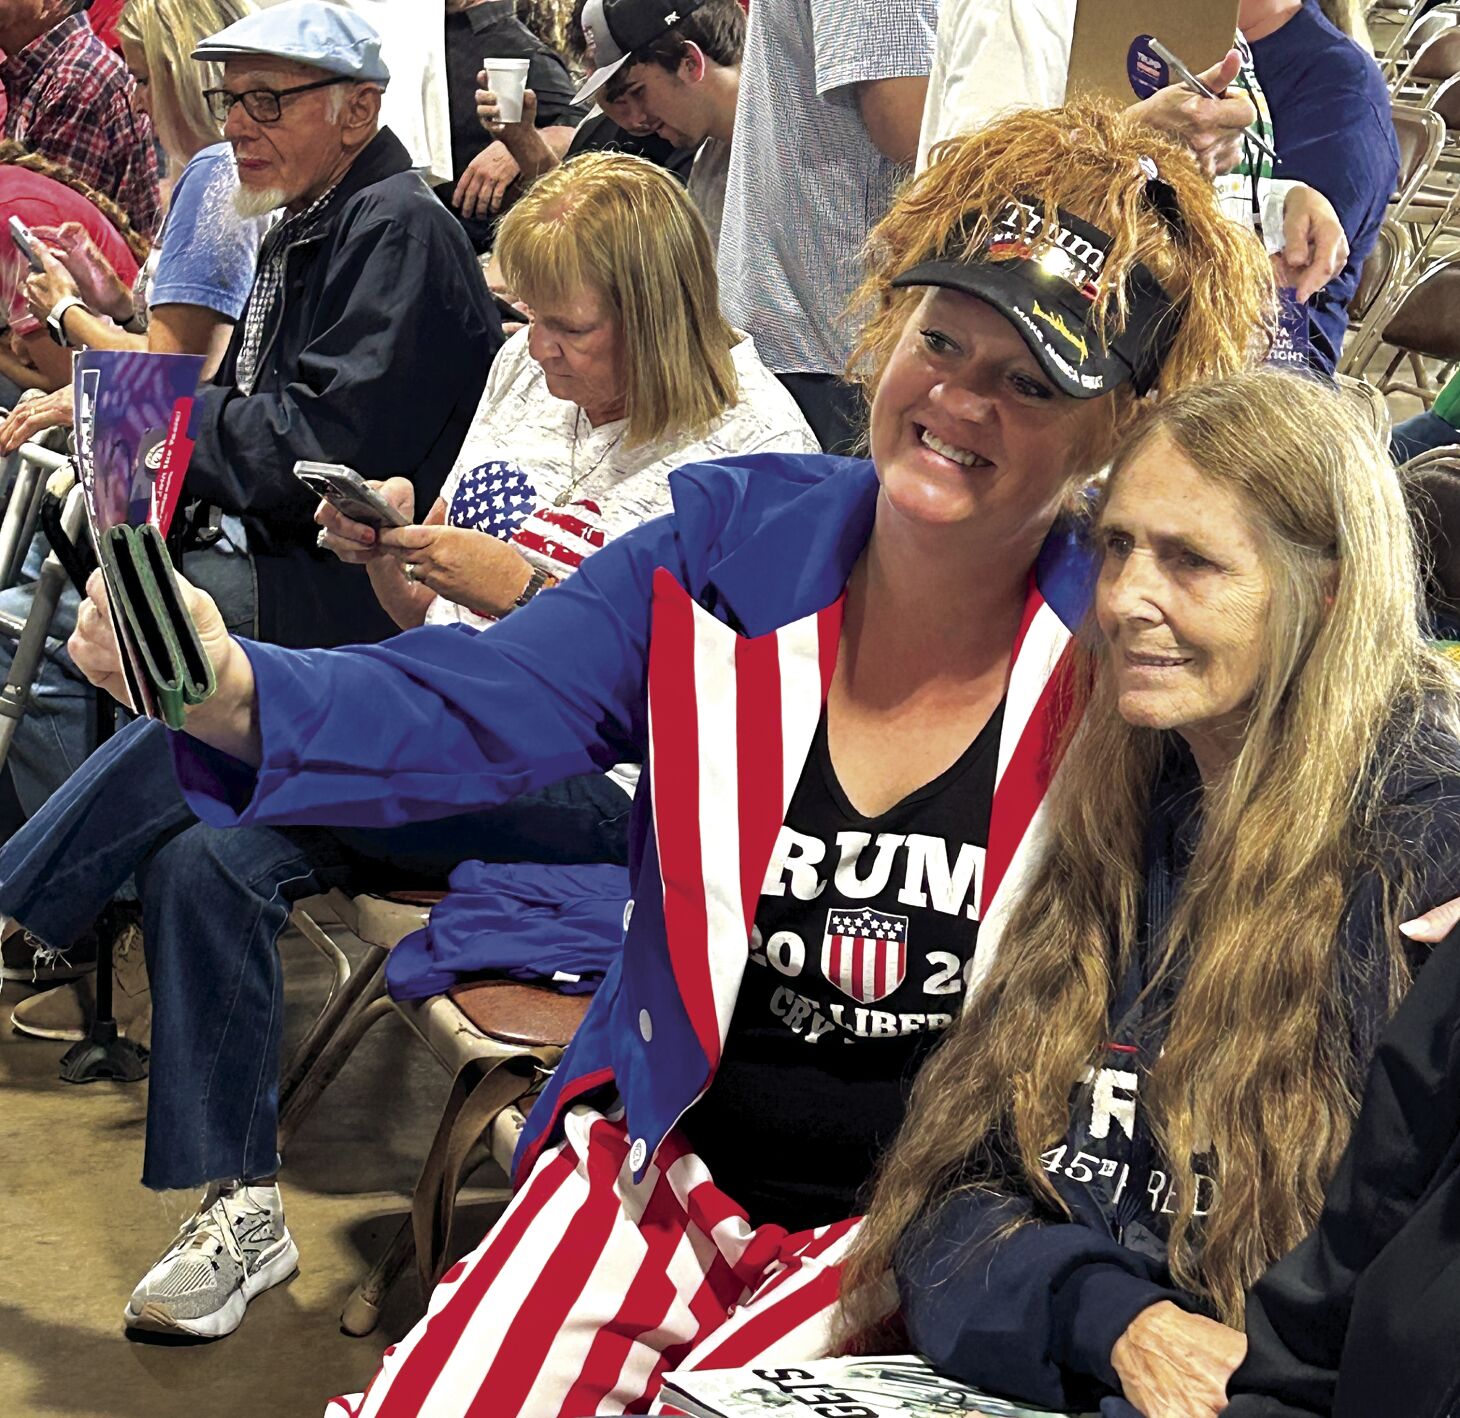 Former President Trump urges supporters to be patriots during upcoming Iowa caucuses Tri-state News telegraphherald image